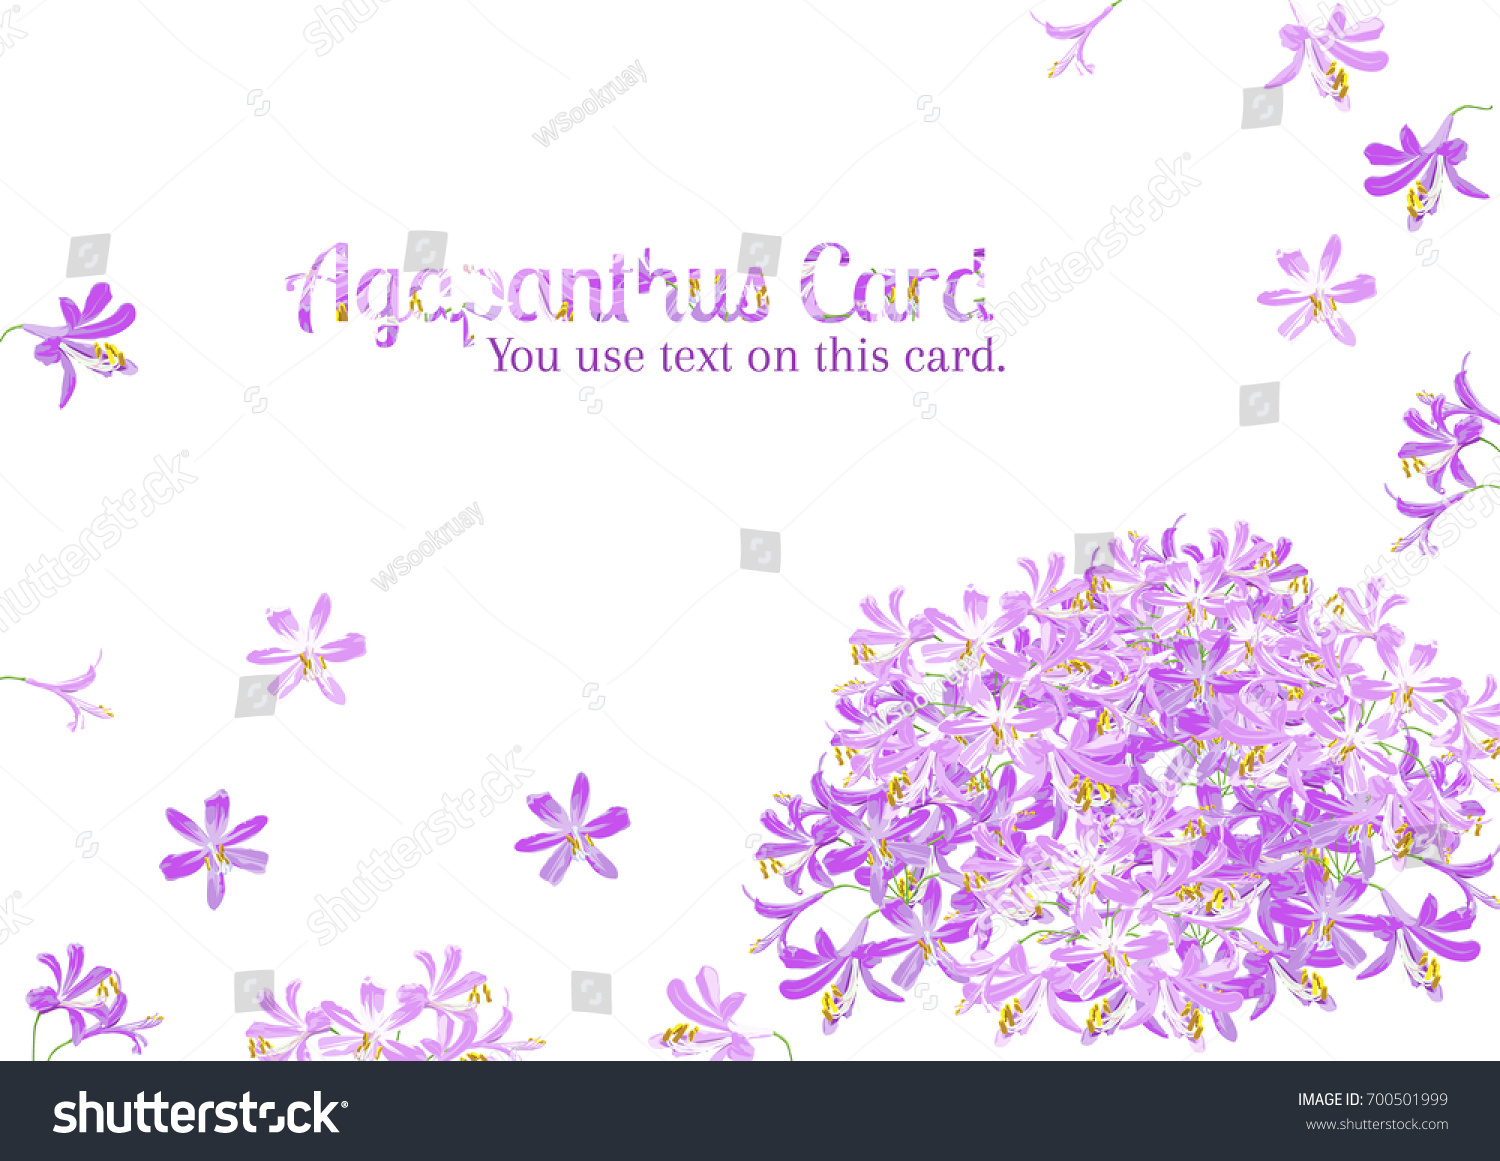 SVG of Agapanthus flower spring) for card, text on card with purple agapanthus flower is vector for card.  svg